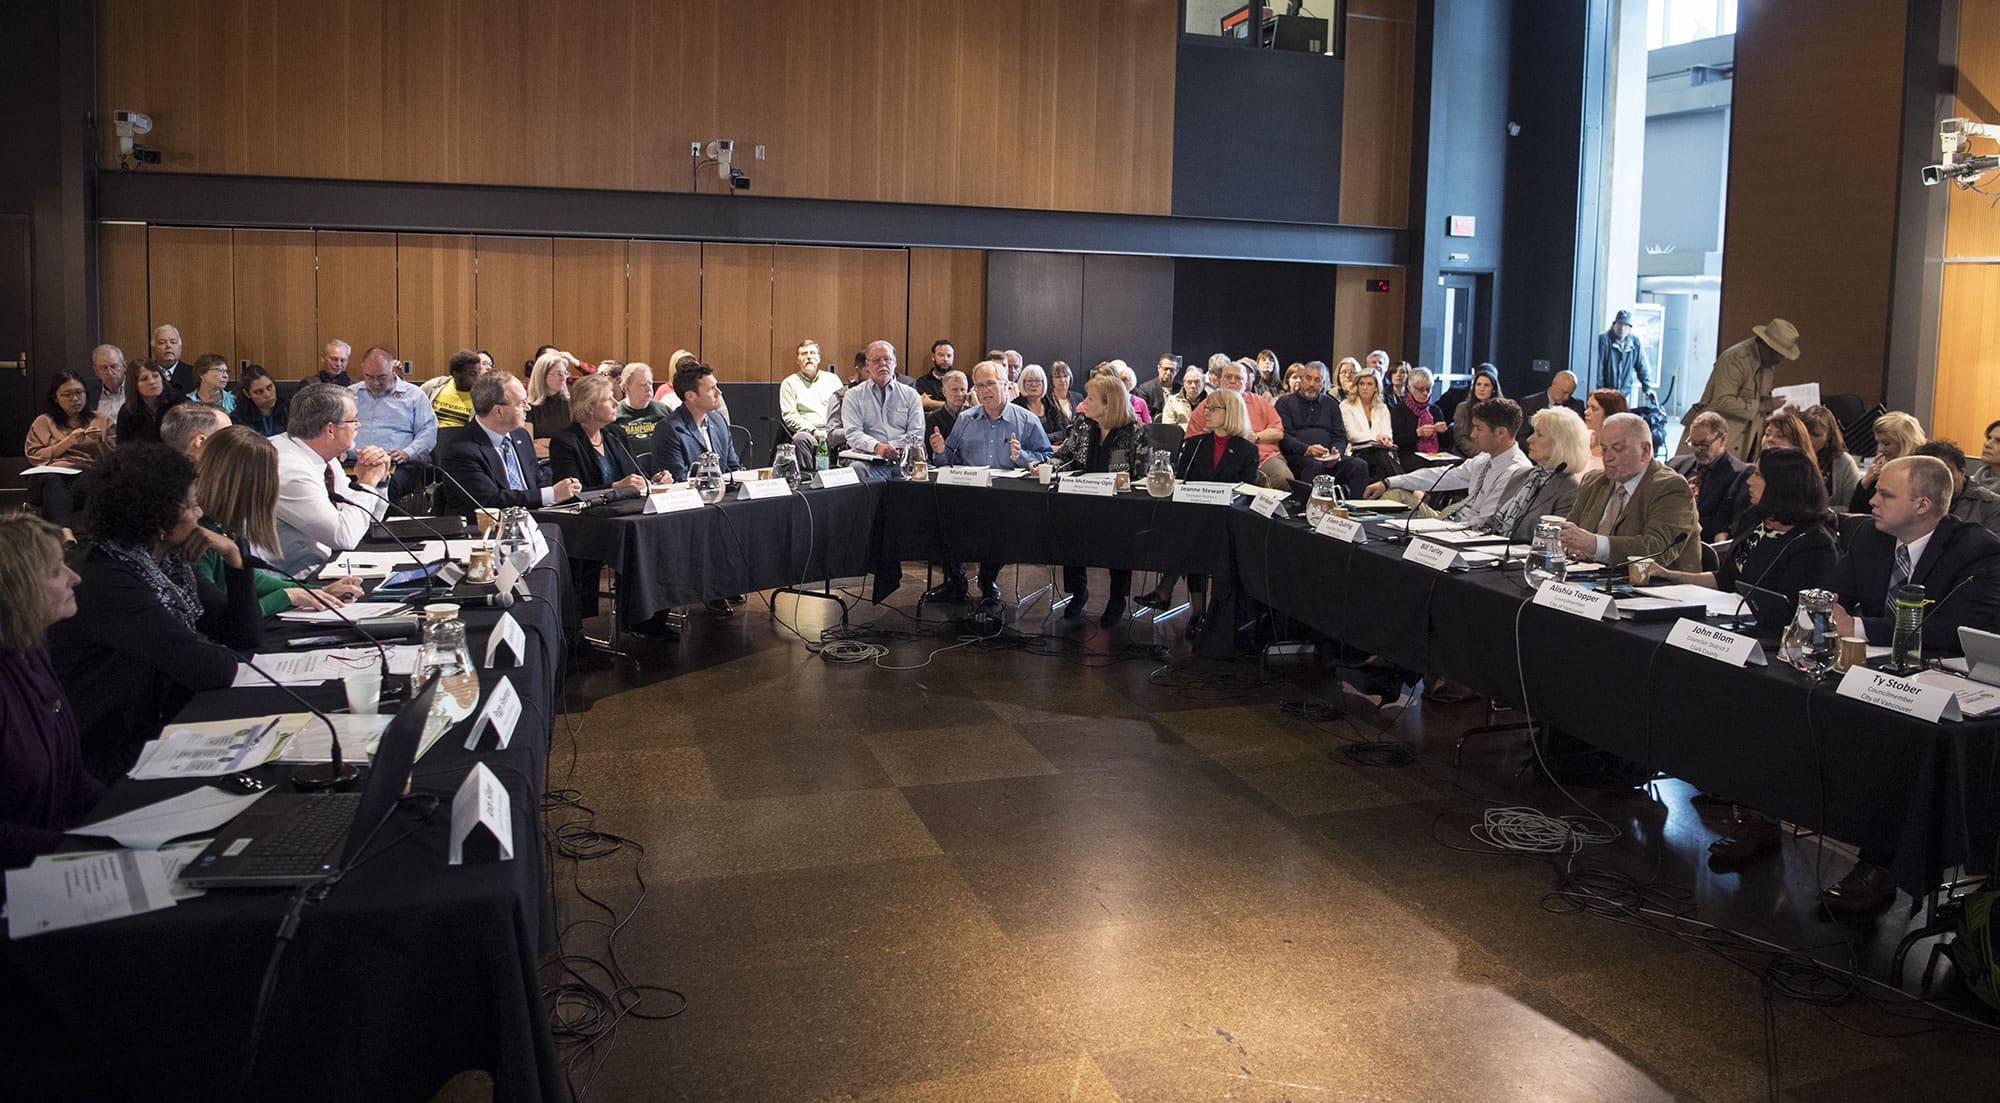 The Vancouver City Council and the Clark County council discuss homelessness during a meeting Monday evening at the Vancouver Community Library.